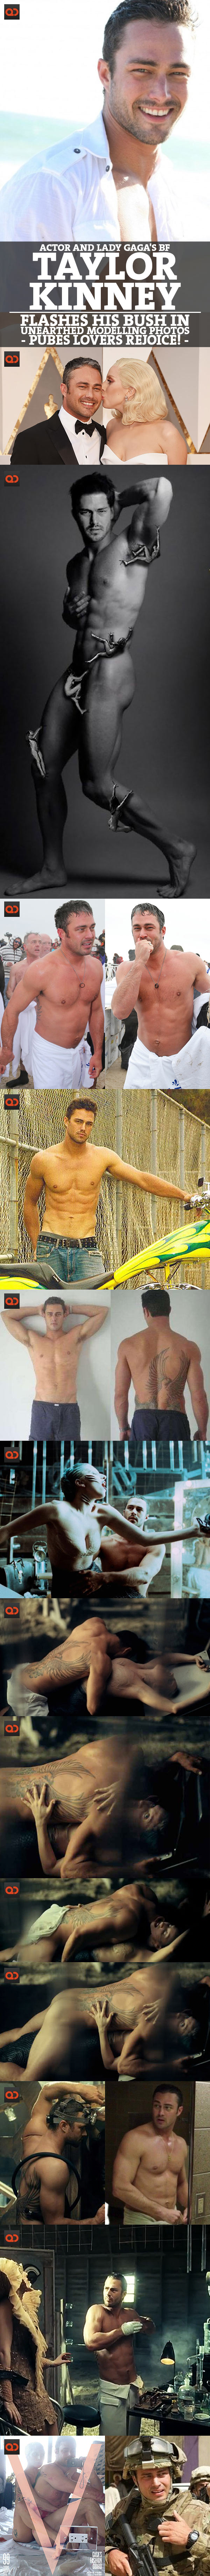 Taylor Kinney, Actor And Lady Gaga's BF, Flashes His Bush In UnEarthed Modelling Photos - Pubes Lovers Rejoice!